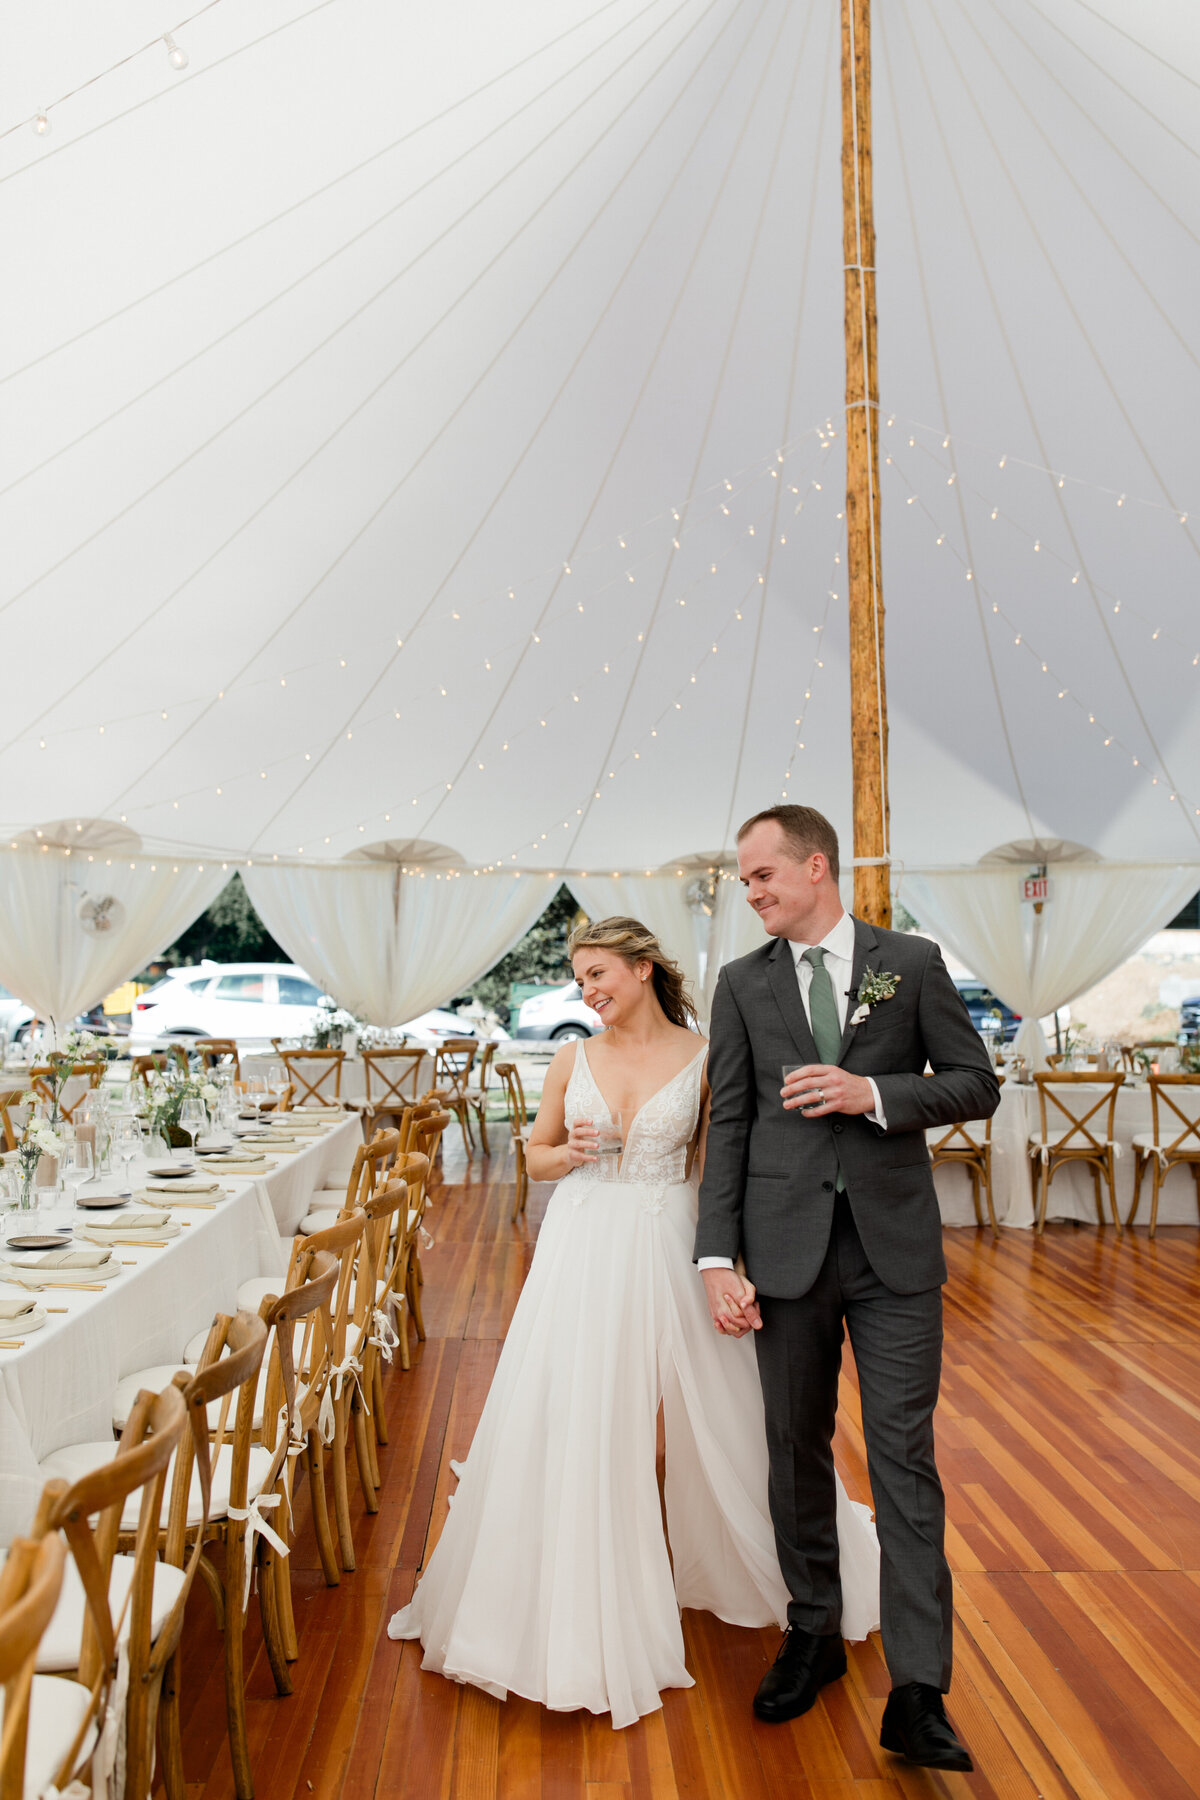 beautiful-sailclotch-tent-wedding-reception-nature-inspired-reception-tables